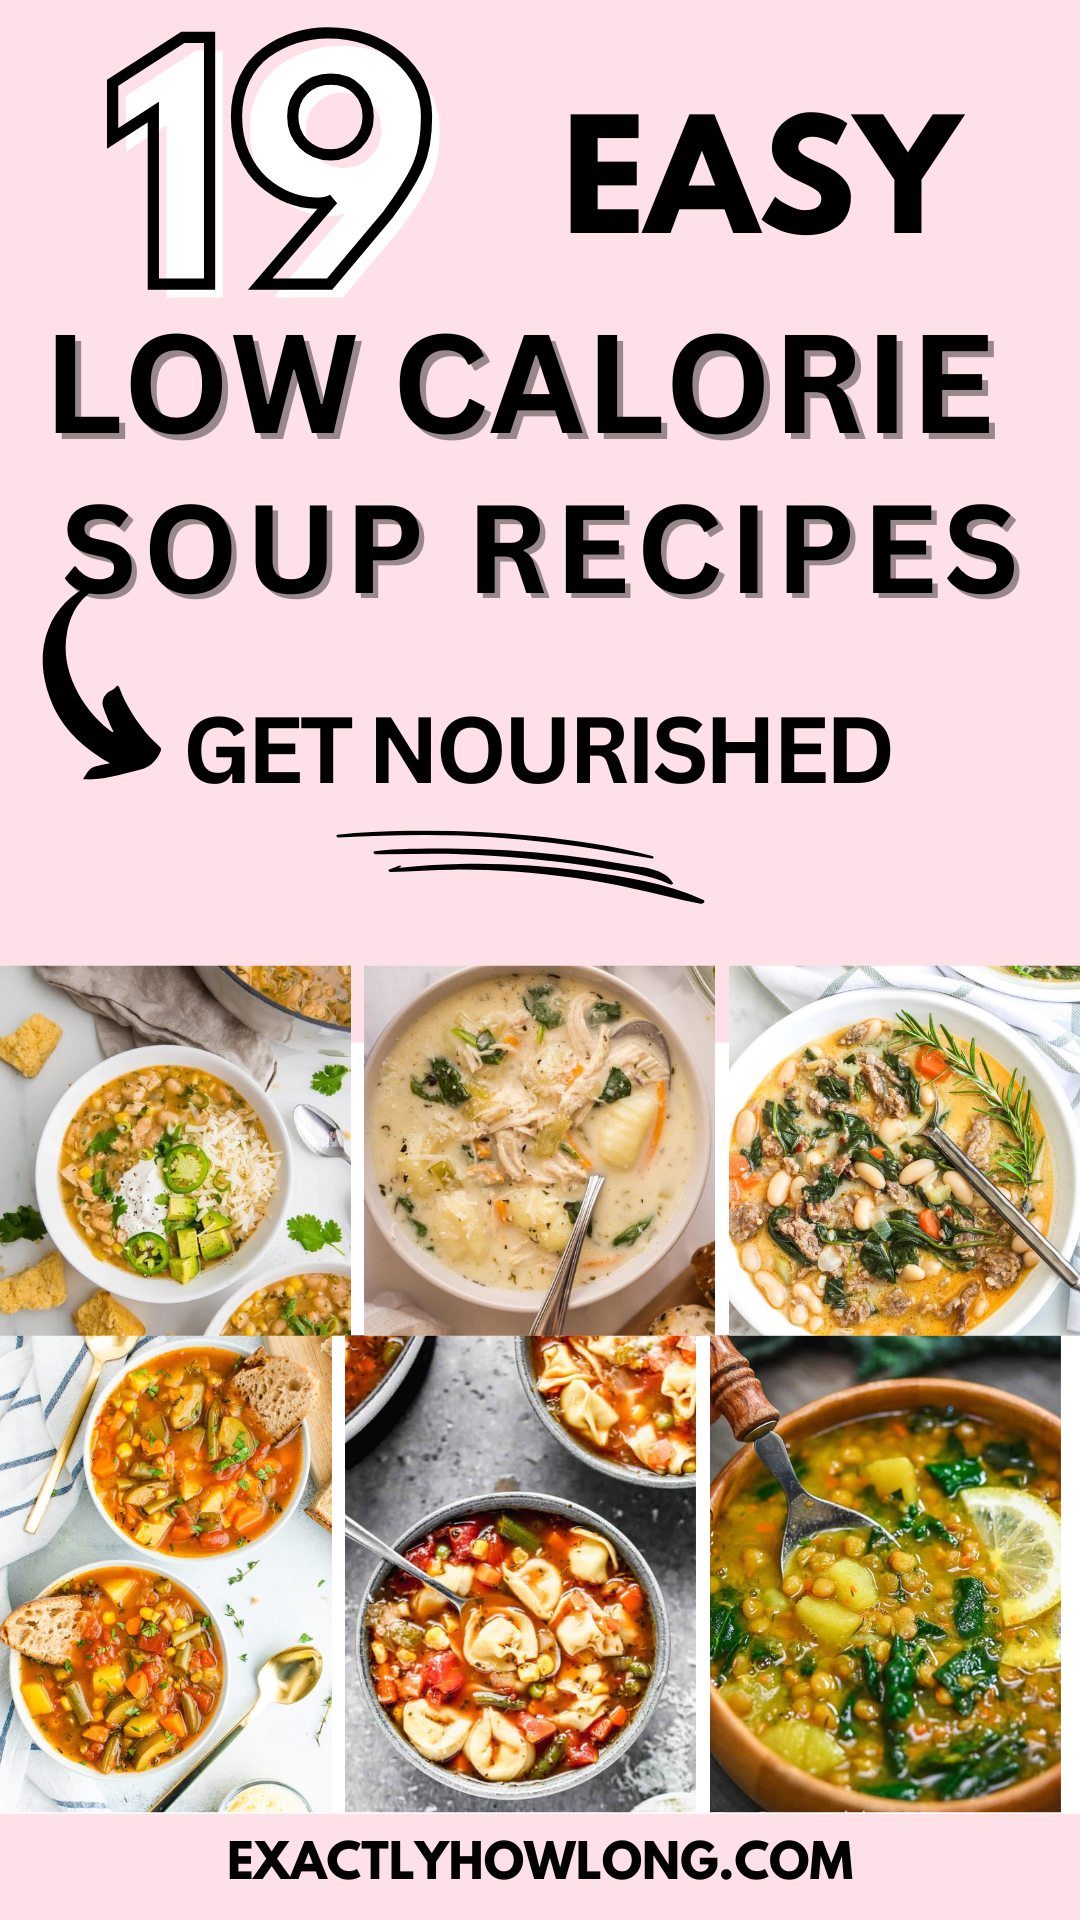 Soup recipes with reduced calories for effective weight management